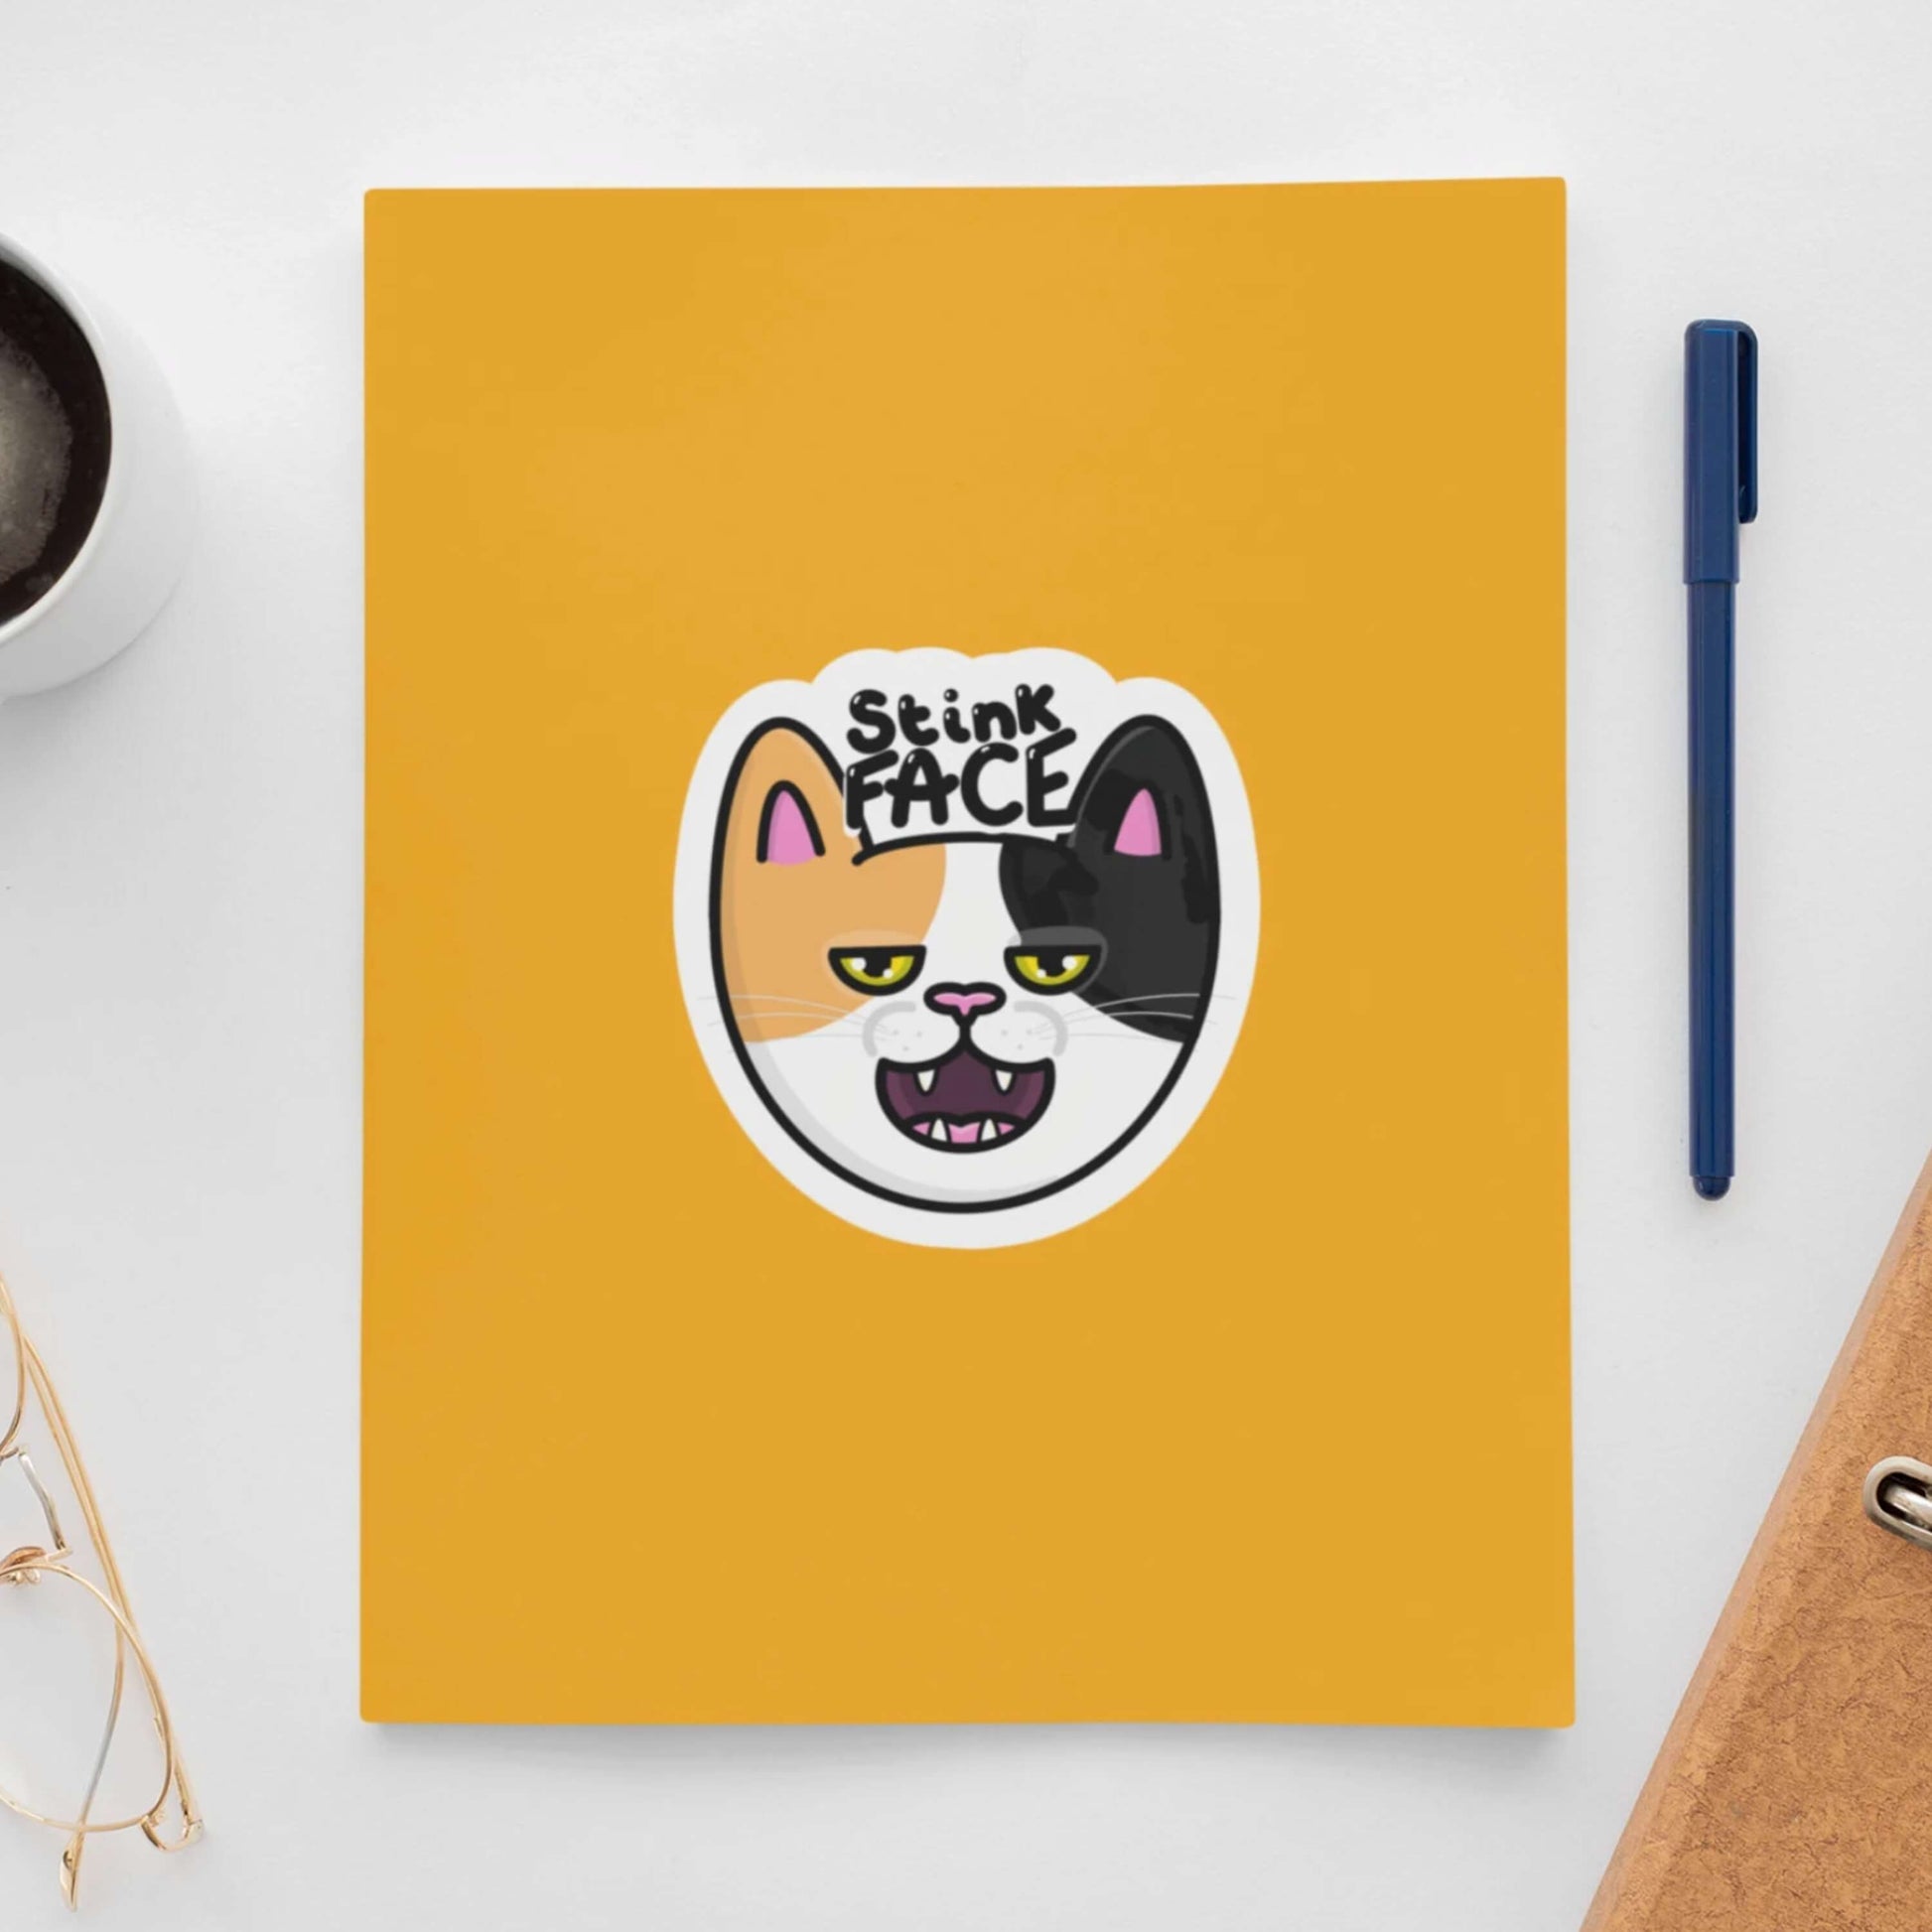 The Stink Face Cat Sticker stuck on a yellow notebook with a black coffee, glasses, file and a pen all on a white desk. The orange and black cat head sticker is smiling with a smug look on its face and black text above reading 'stink face'.